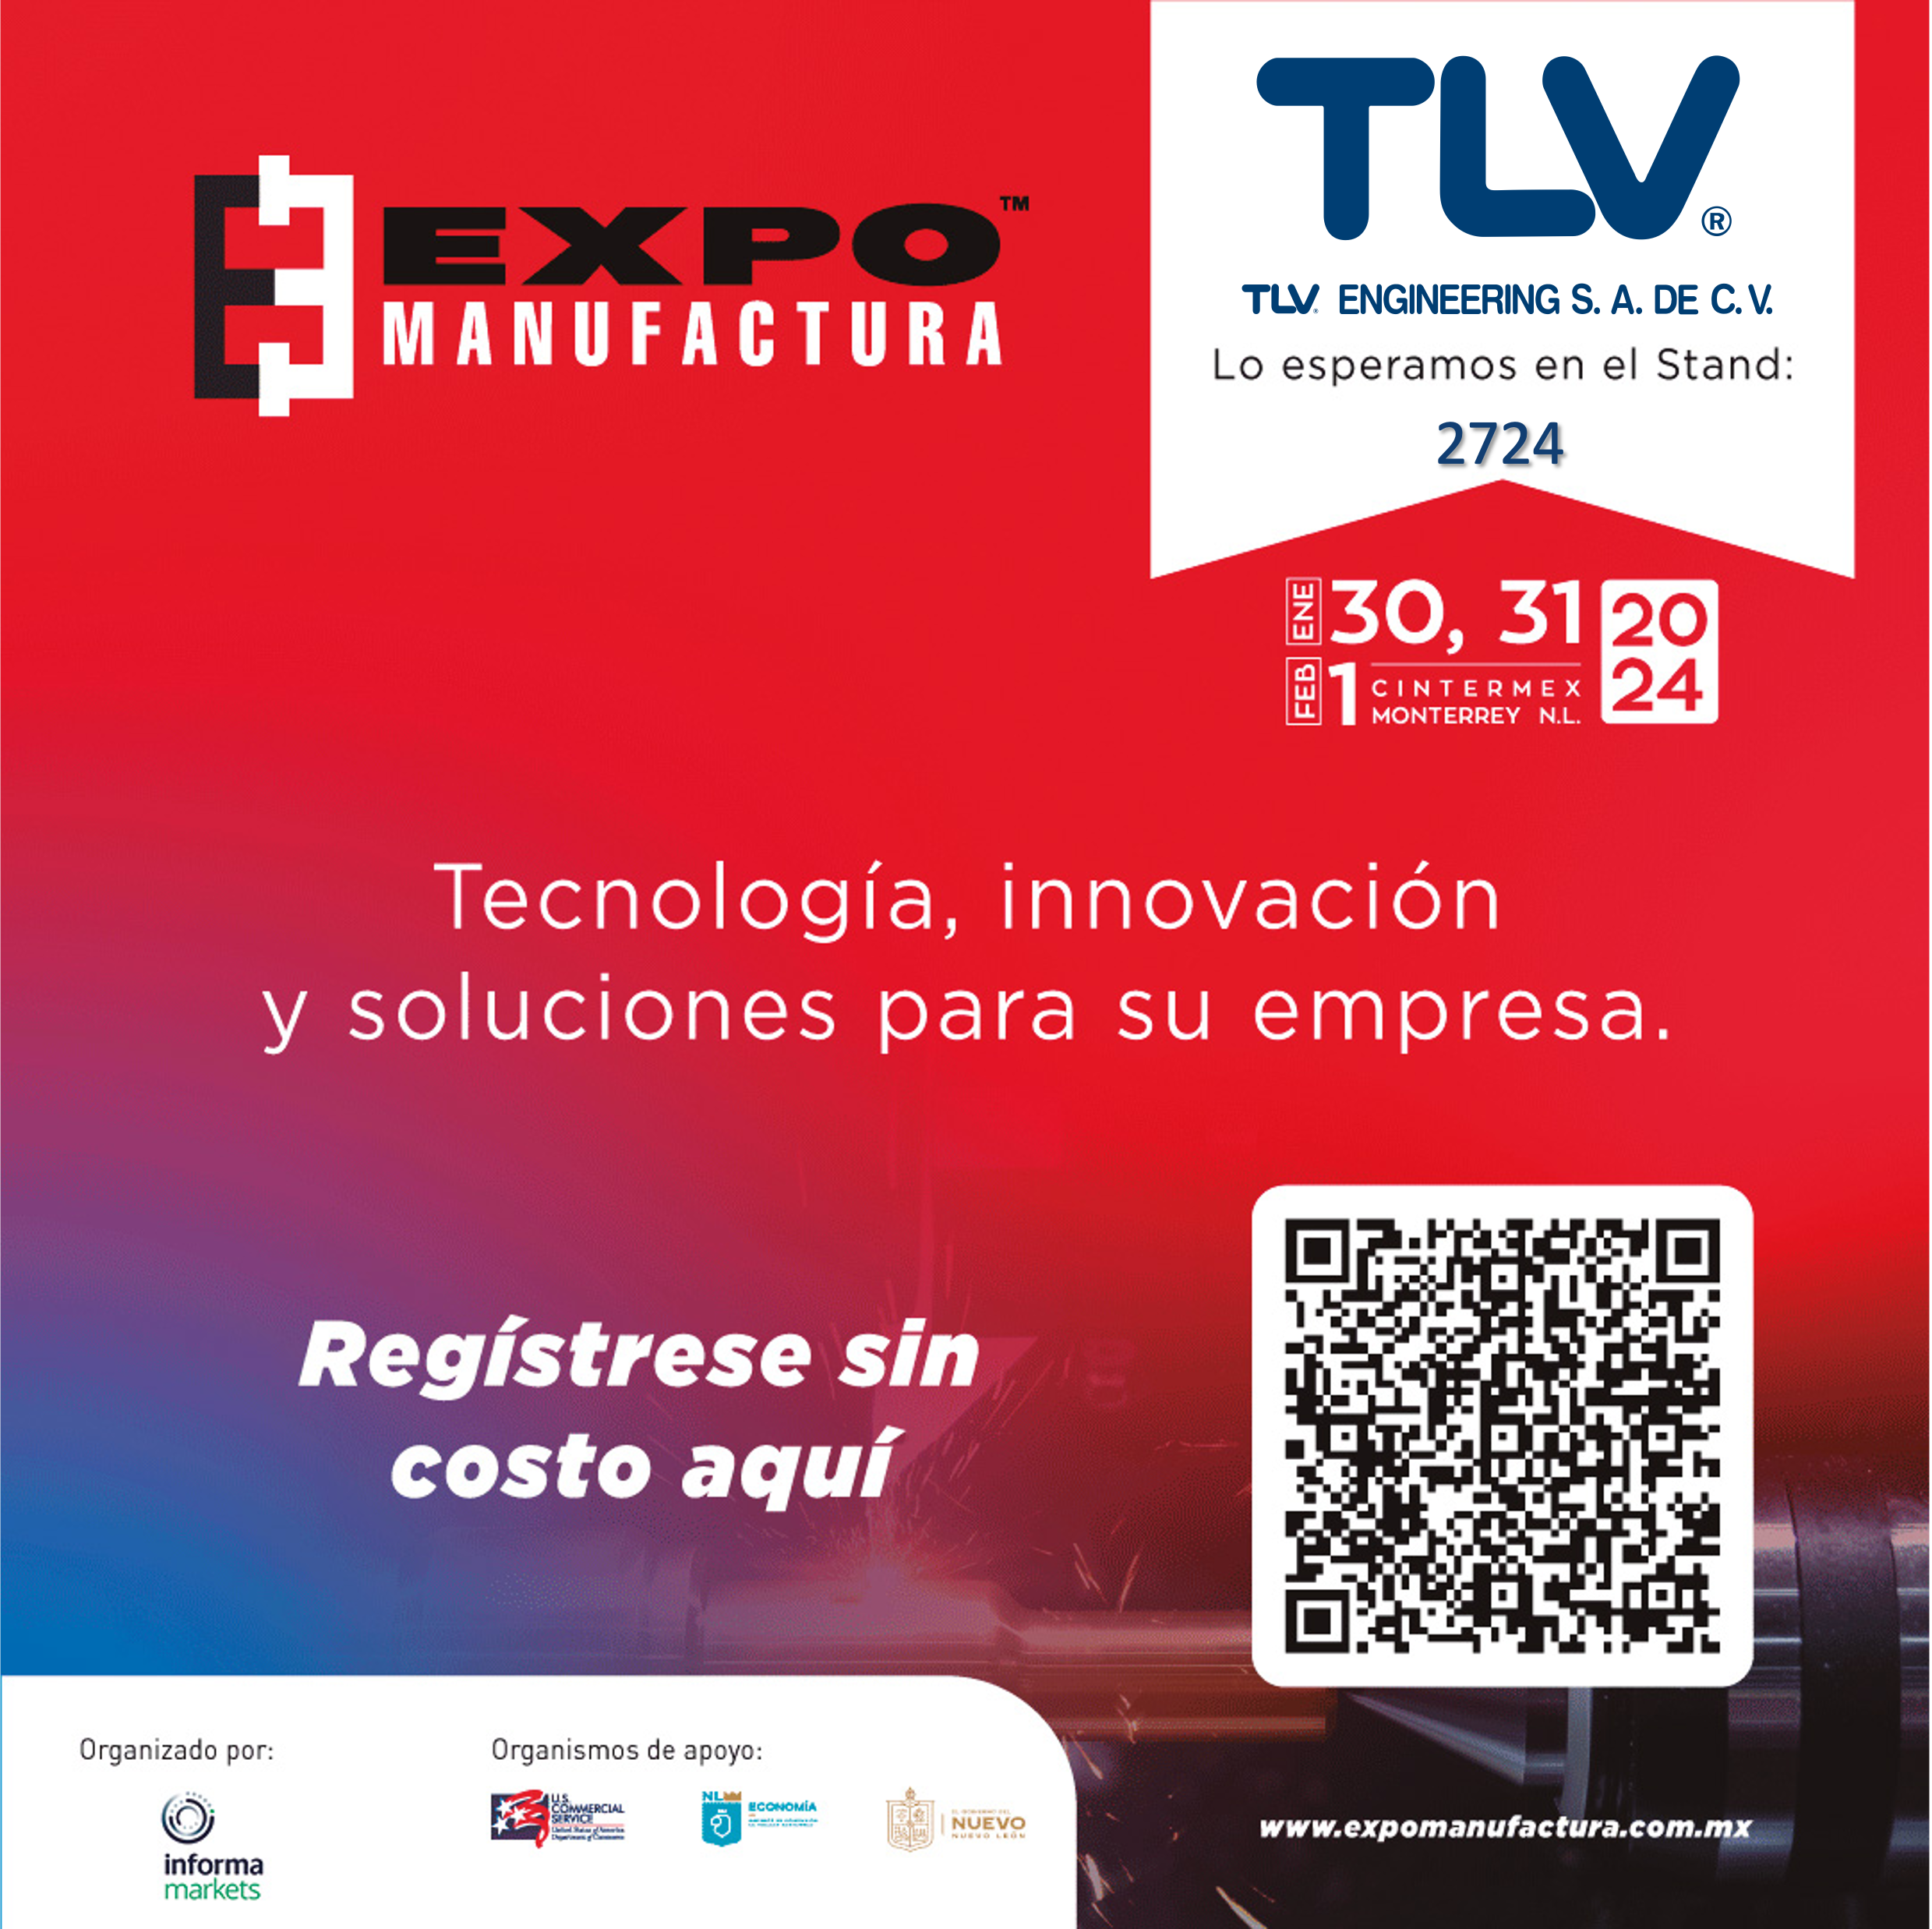 Expo manufactura banner